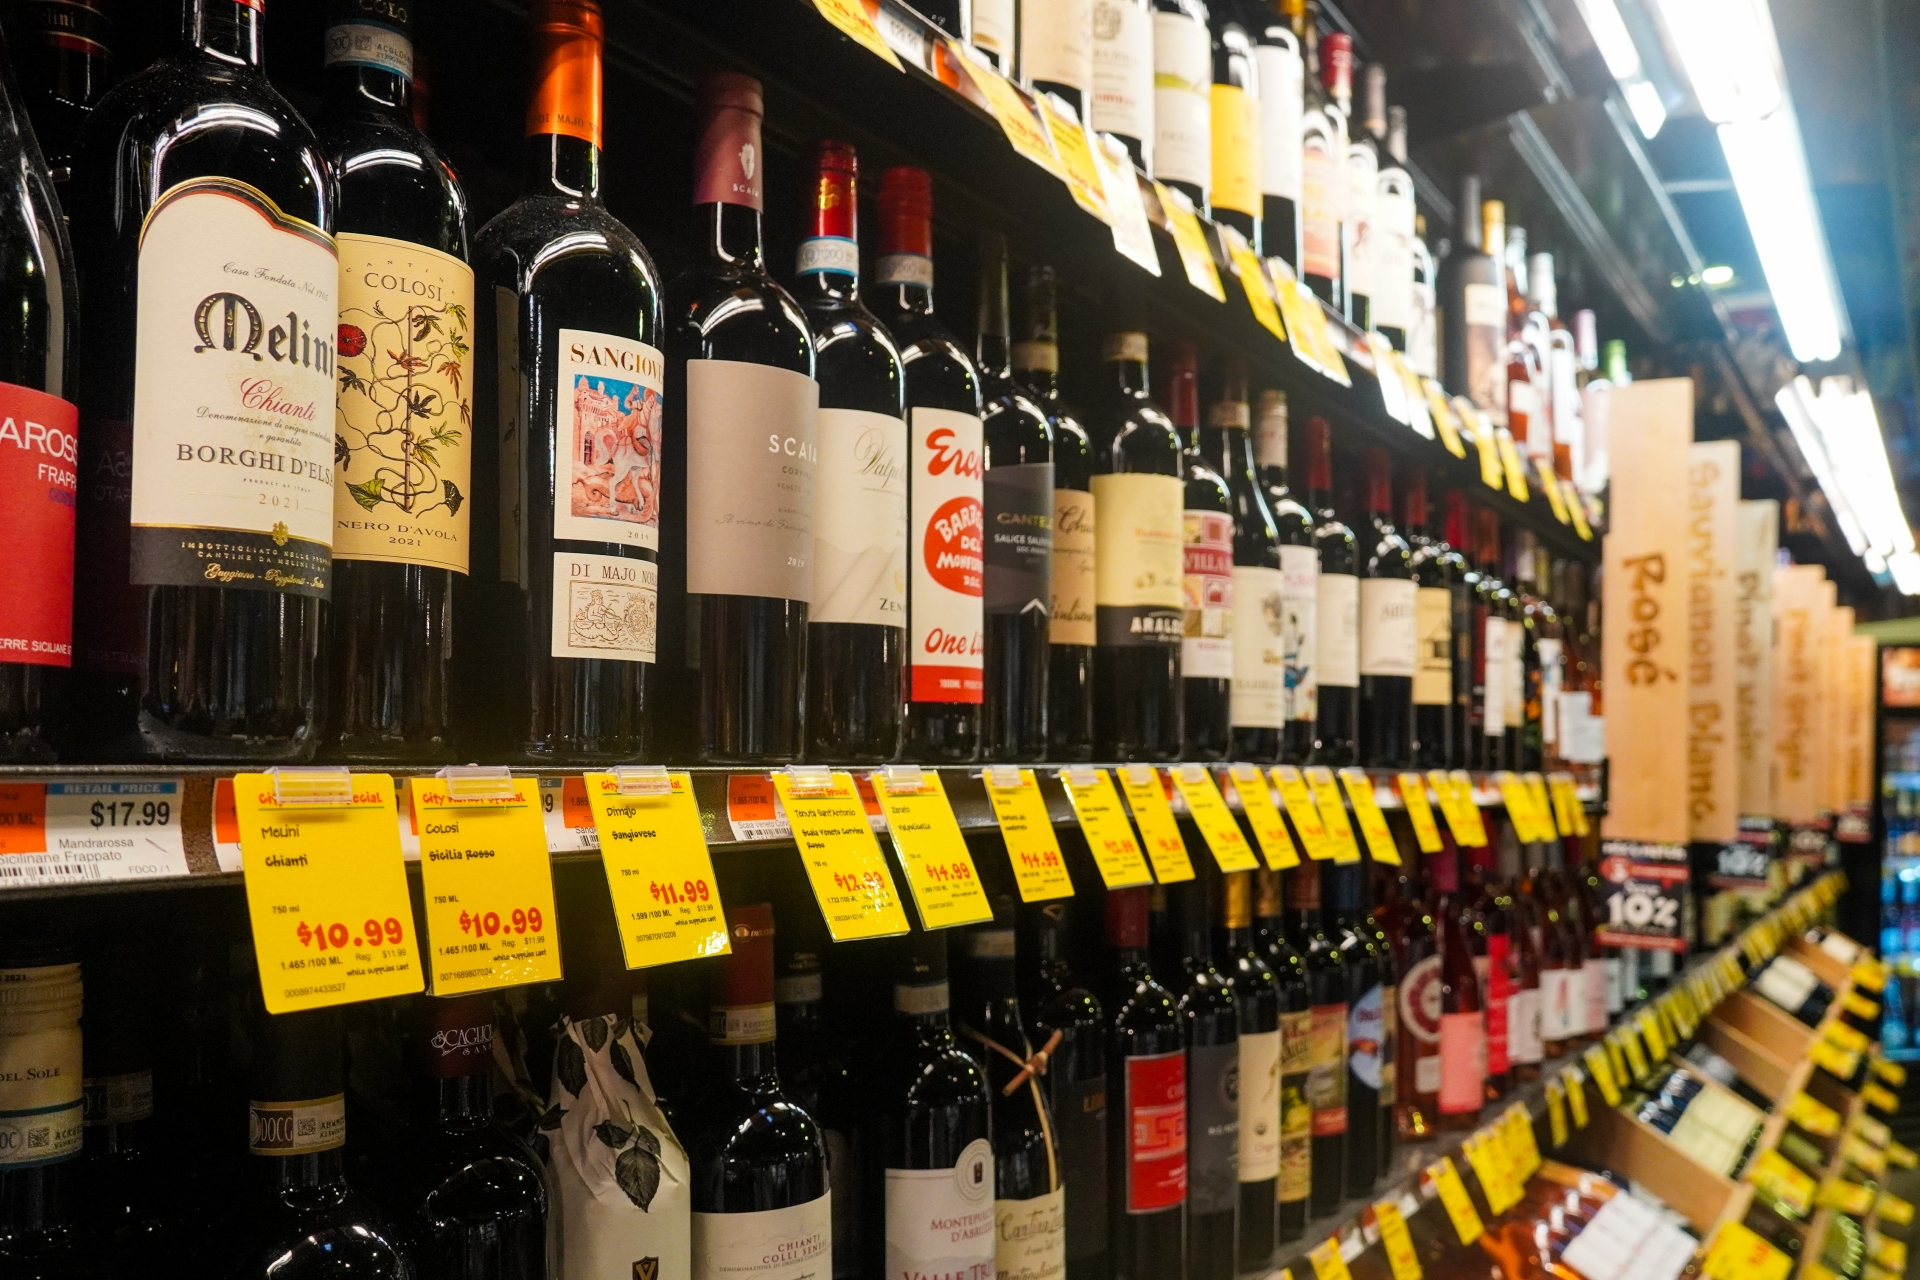 Bottles of wine with colorful labels displayed on several shelves in a store. Price tags run along the front of each shelf and vertical slats of wood with labels sub divide categories of wine.